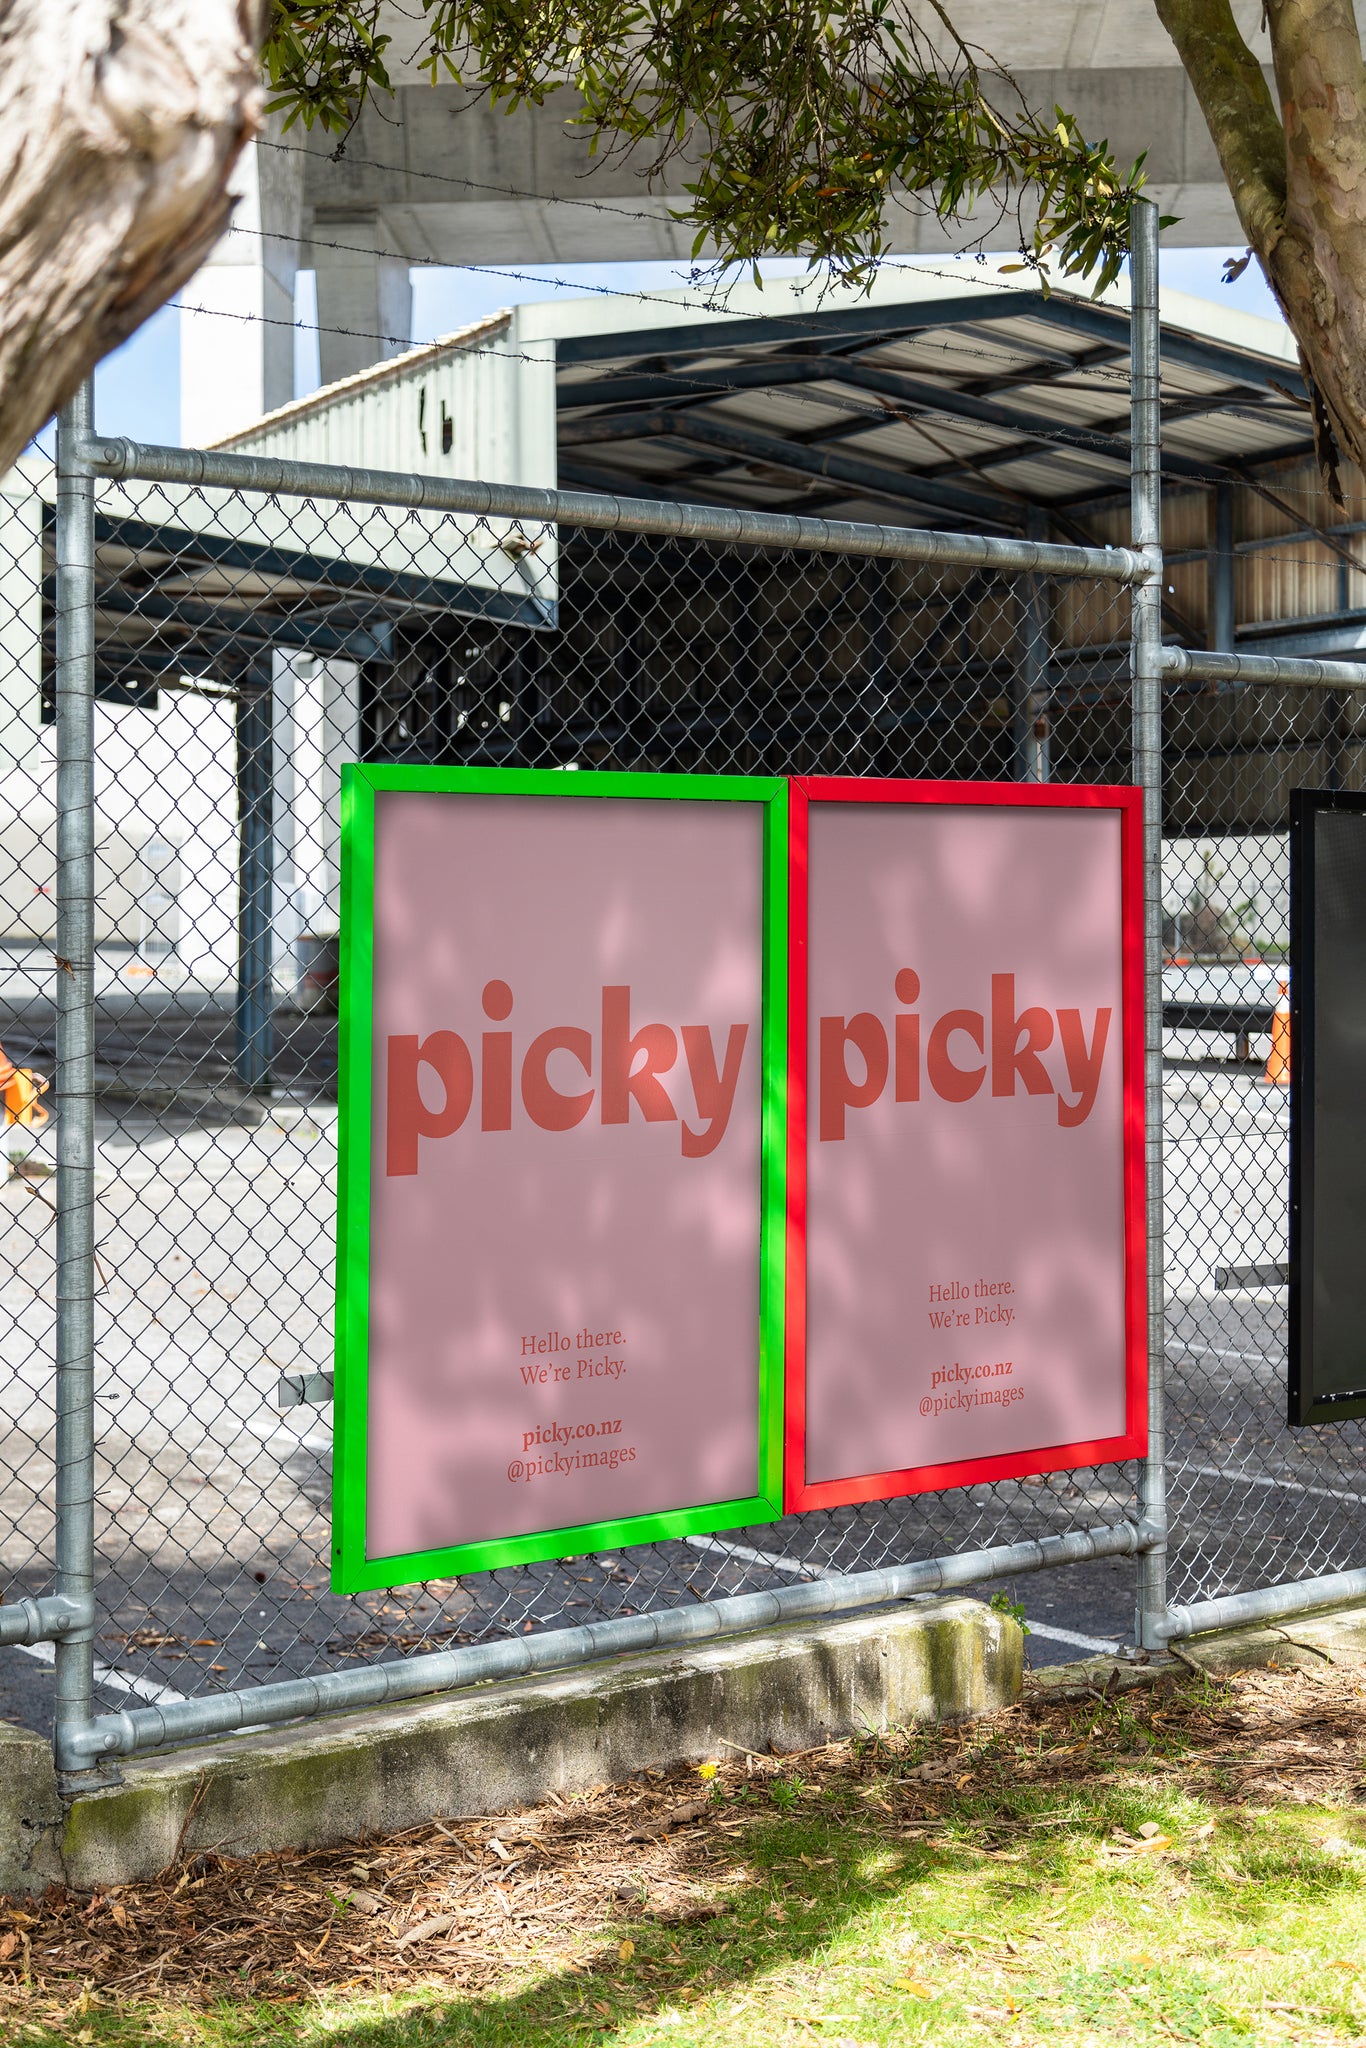 Portrait of colorful advertisement frames on a wire fence sheltered by trees, the frame holds a pink mock advertisement with a red picky logo.